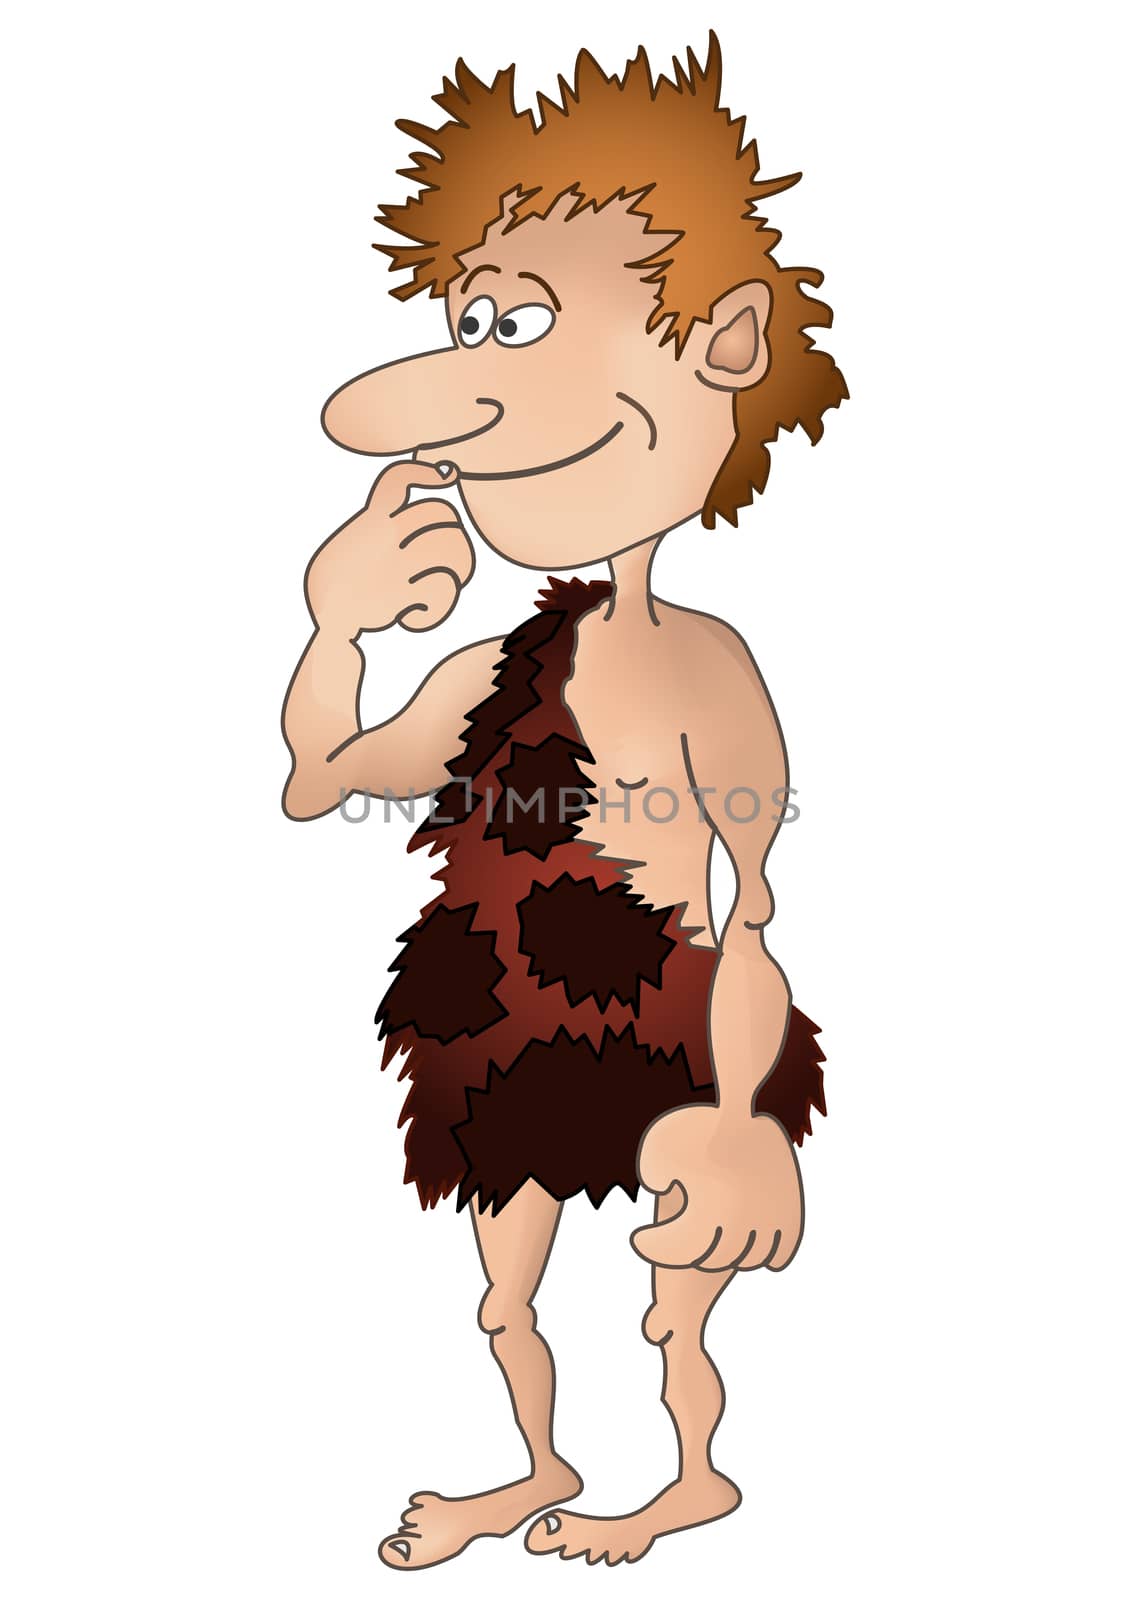 Shaggy prehistoric cave-boy in animal skin with interest looking somewhere